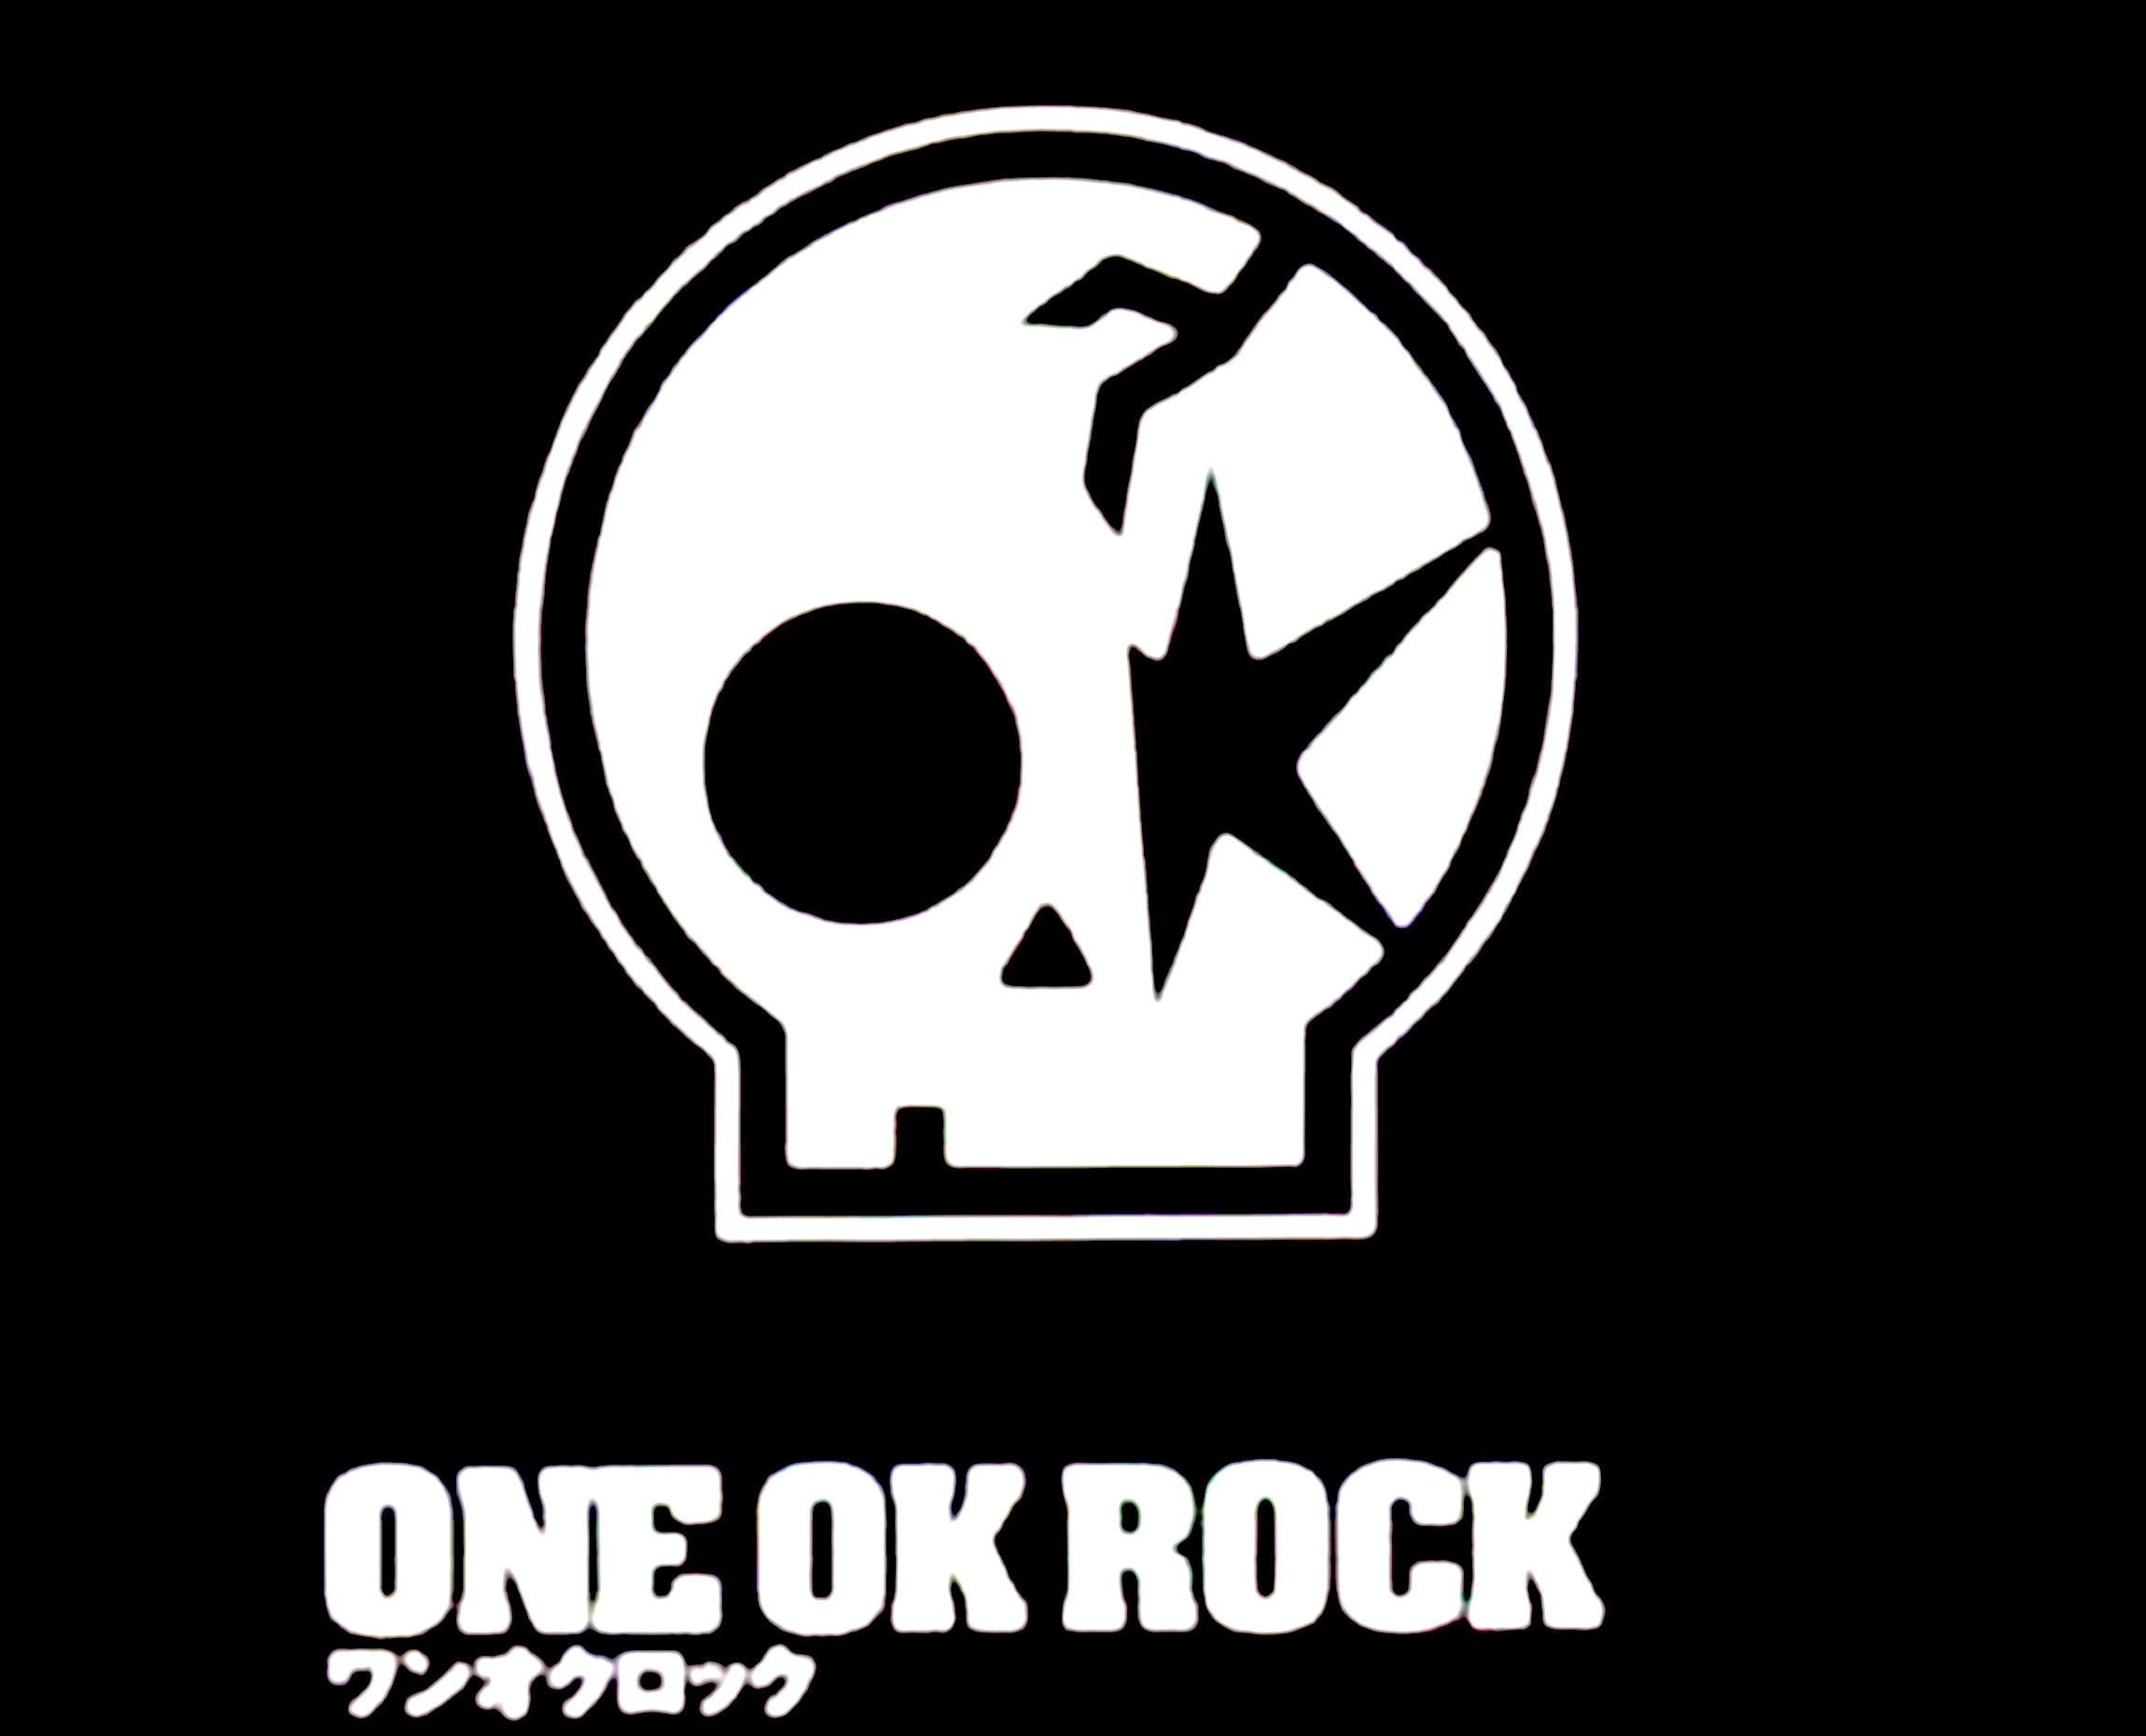 2300x1861 Formed in 2005, ONE OK ROCK has performed mainly at live concerts. The group